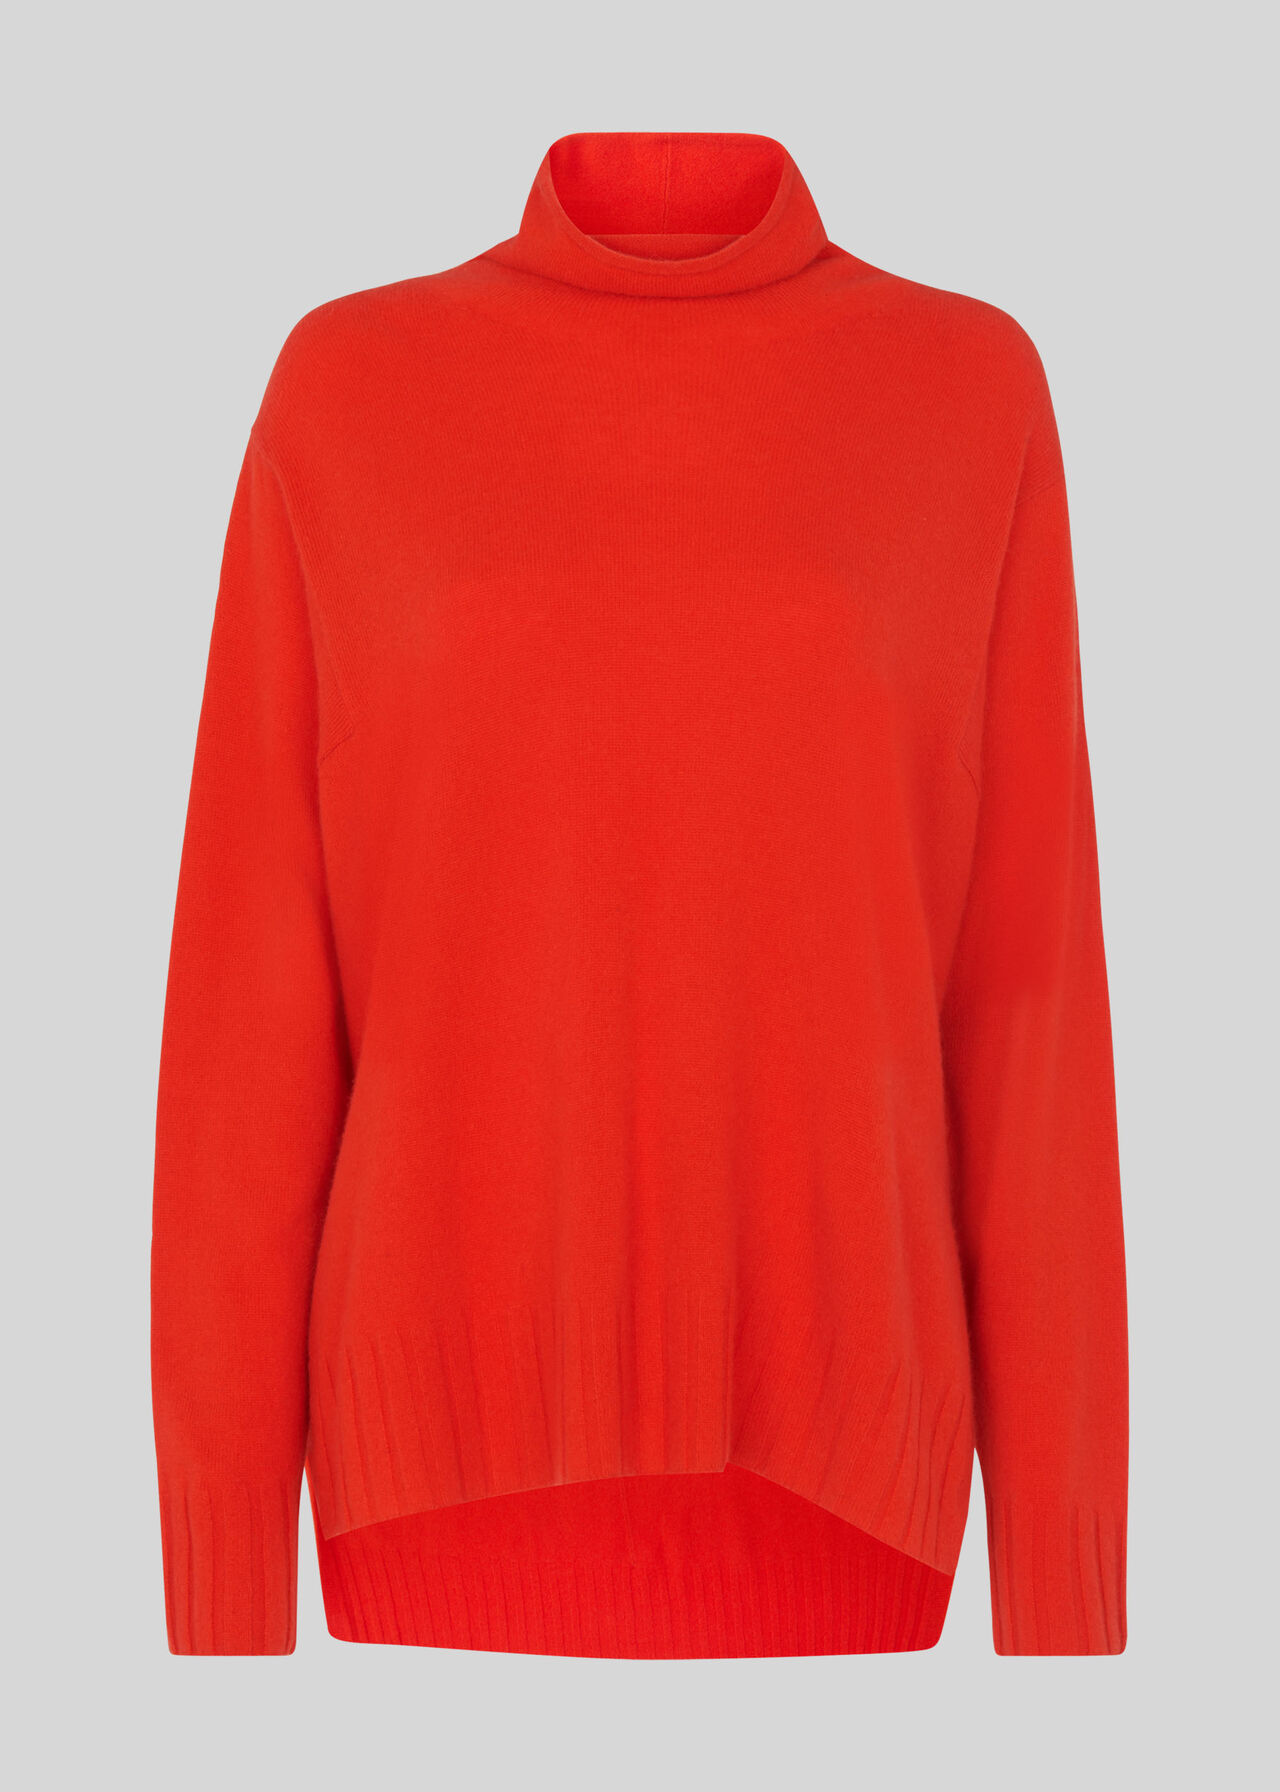 Red Cashmere Funnel Neck Sweater | WHISTLES | Whistles UK